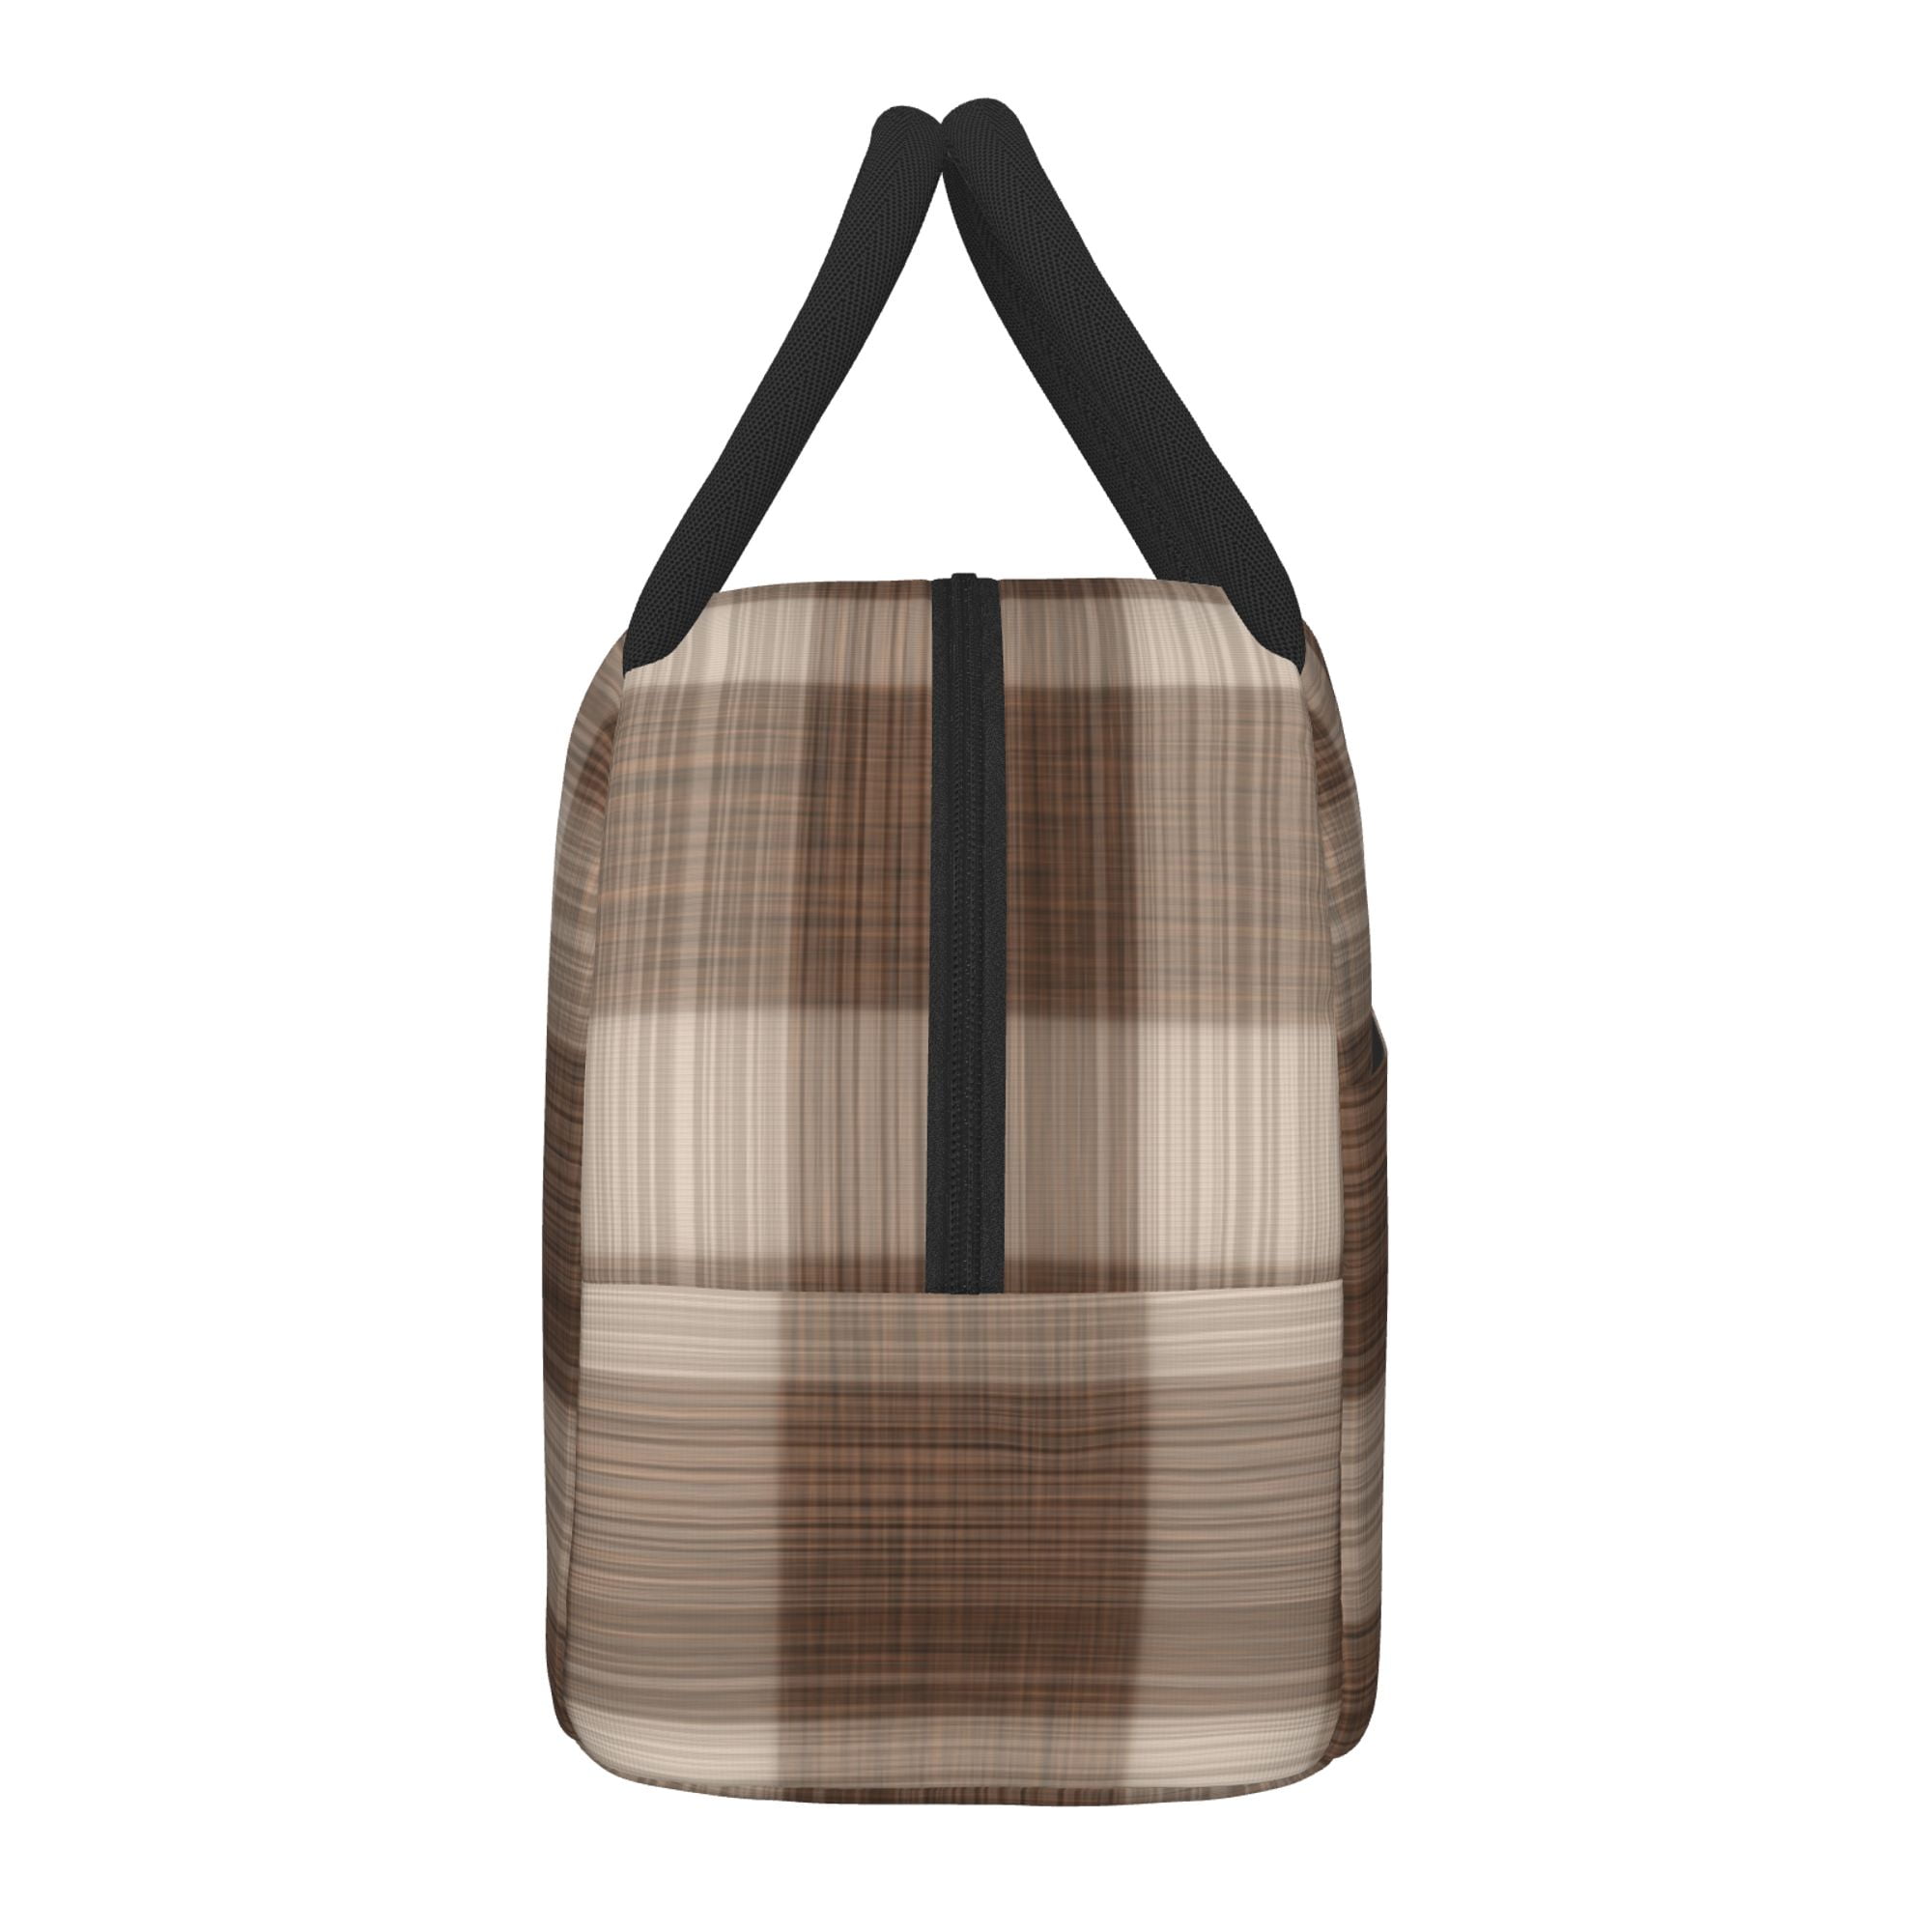 ayvcxui Brown and Black Plaid Race Checkered Flag Lunch Tote Reusable Lunch Bag Insulated Lunch Box for Students Work Outdoor Travel PicnicThermal